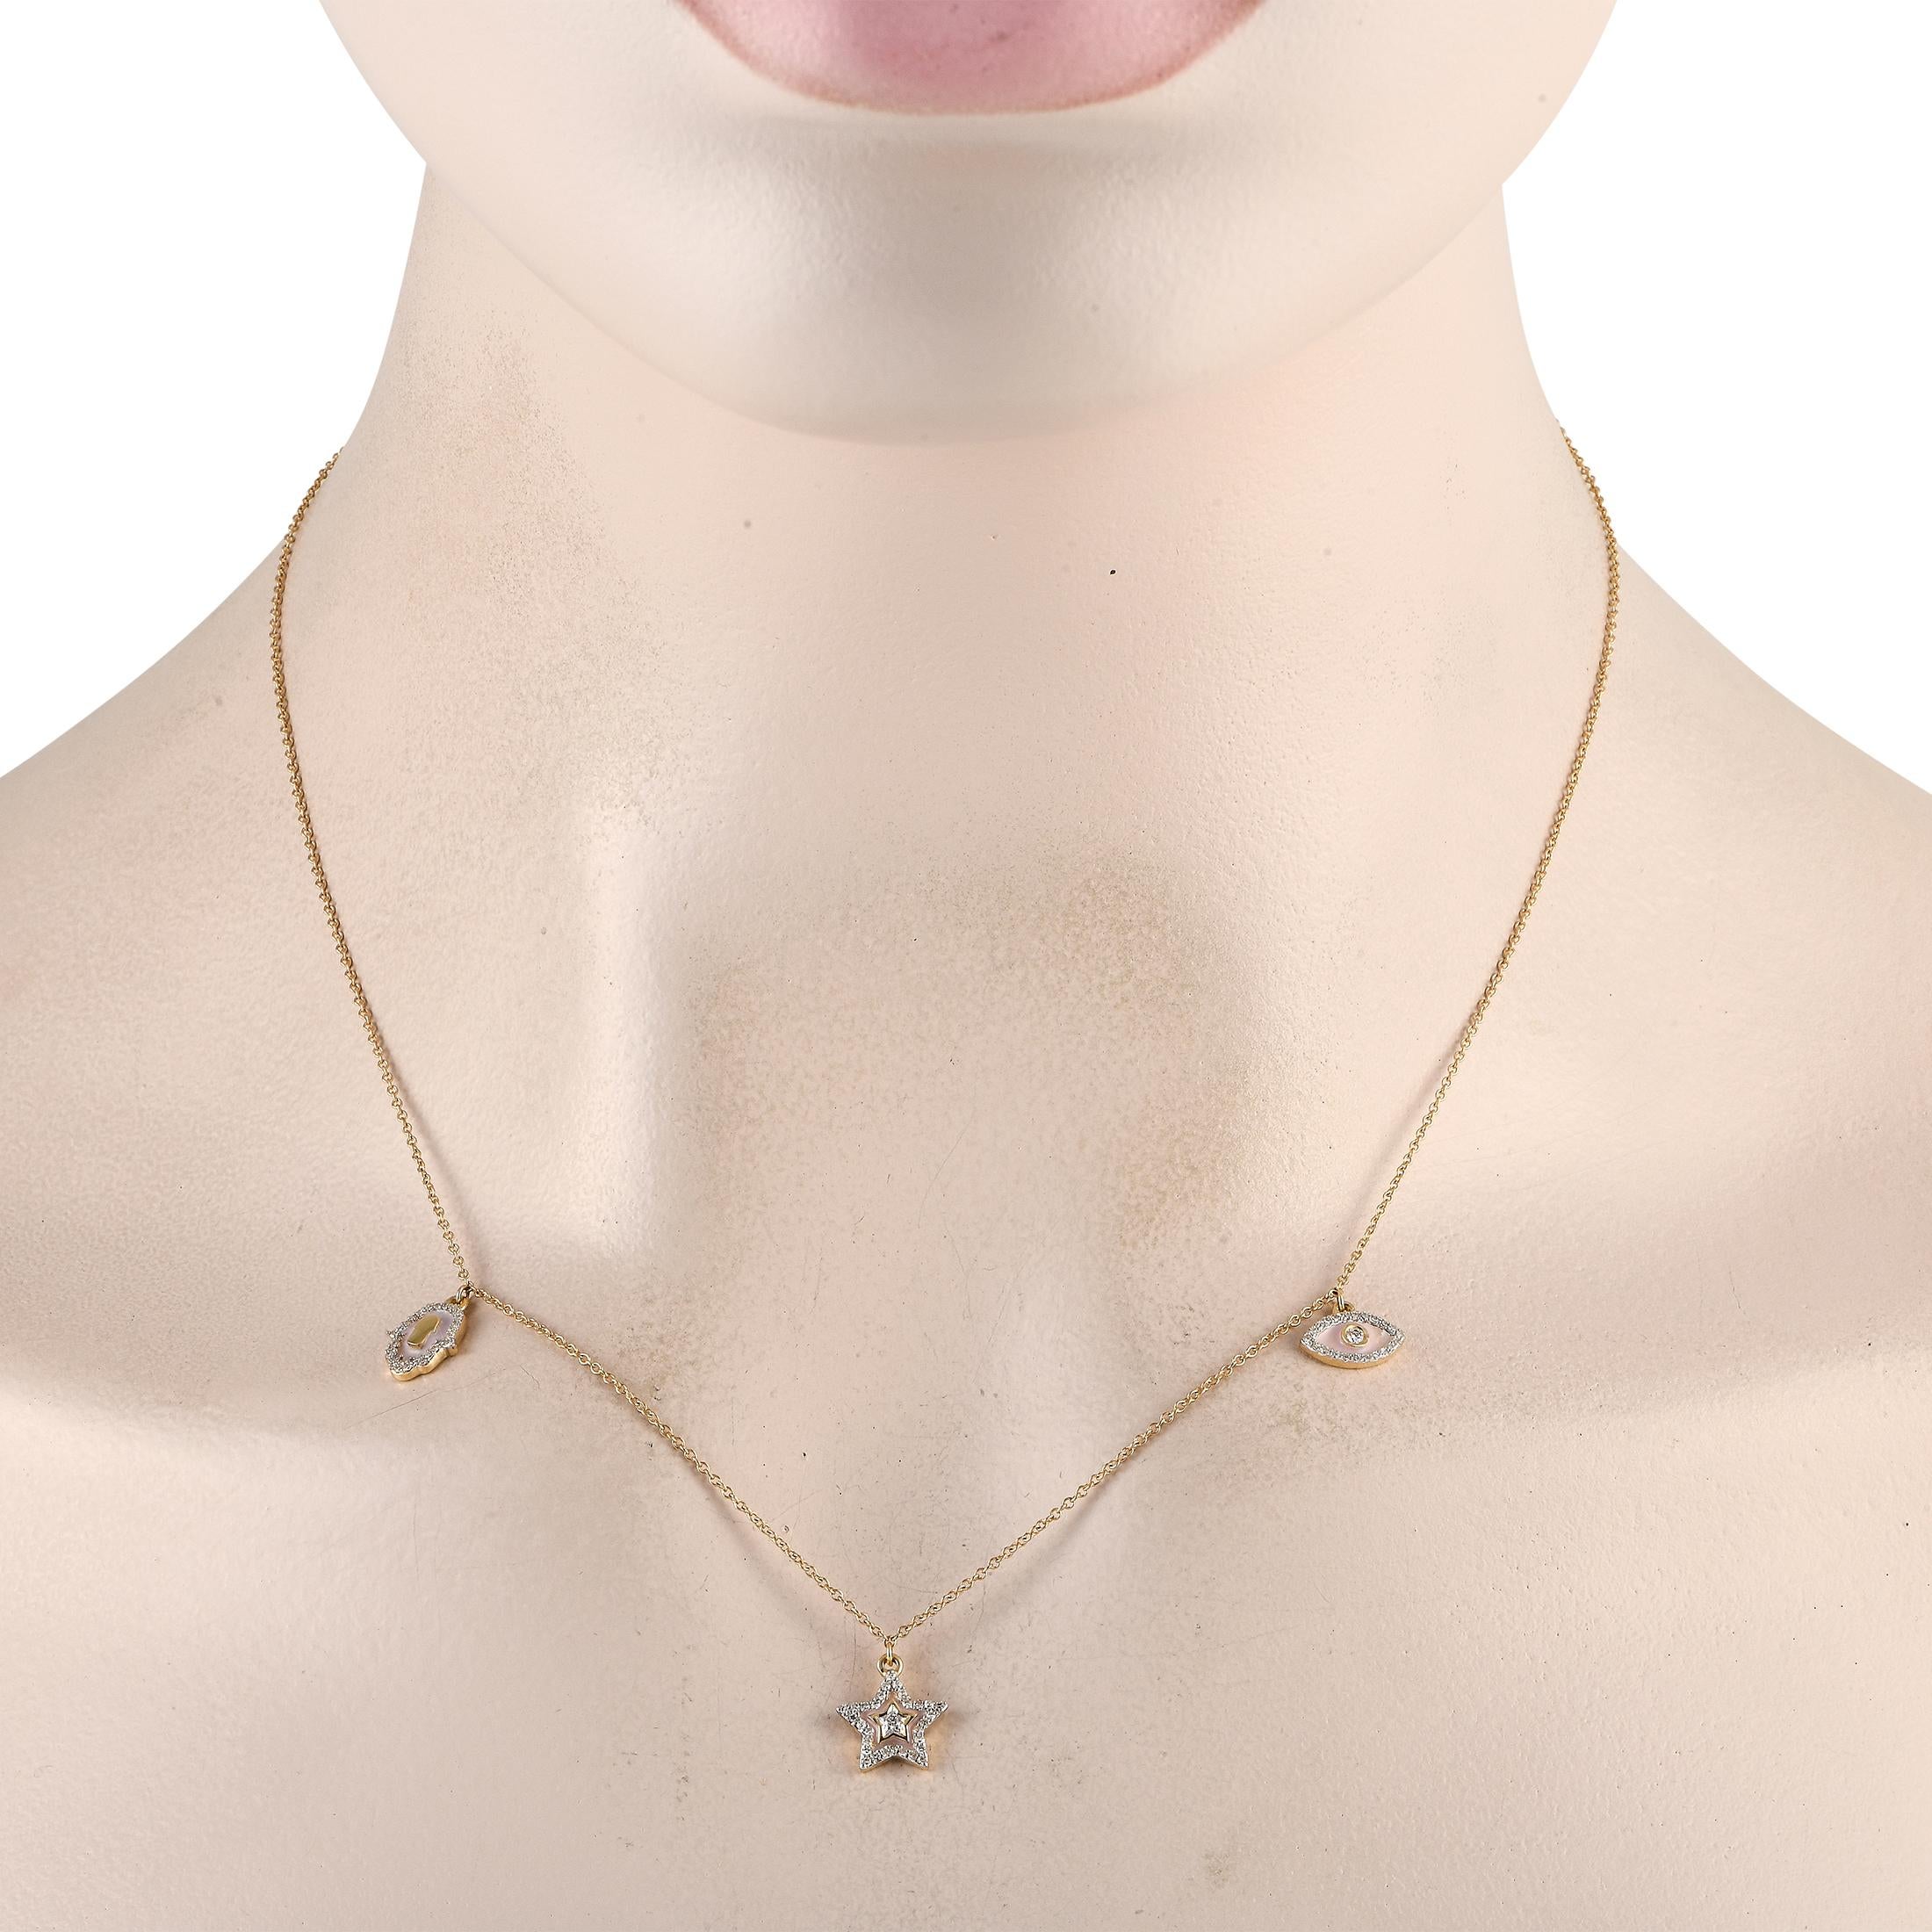 Perfect for anyone with a bohemian aesthetic, this unique luxury necklace comes complete with a series of spiritual symbols suspended from an 18 chain. On each pendant, charming pink accents contrast are beautifully juxtaposed with 14K Yellow Gold